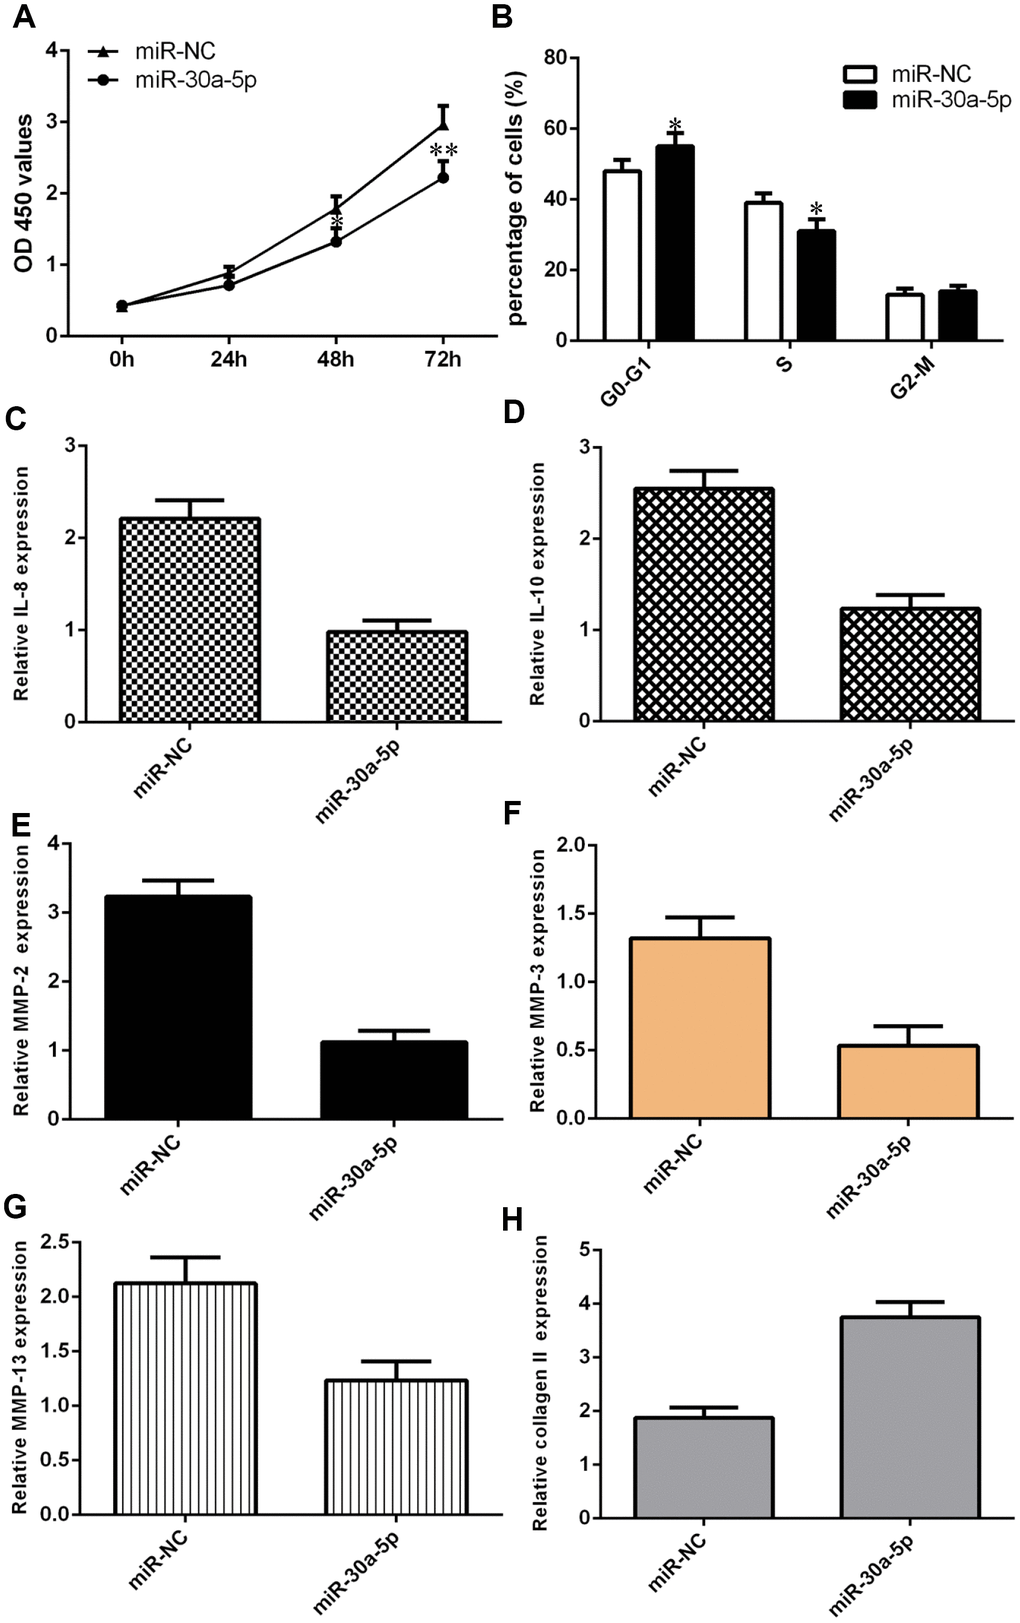 Ectopic expression of miR-30a-5p suppressed cell growth, cell cycle progression, inflammation and ECM degradation. (A) Overexpression of miR-30a-5p decreased cell proliferation in chondrocytes. (B) Elevated expression of miR-30a-5p suppressed the cell cycle in chondrocytes. (C) IL-6 expression was downregulated in chondrocytes after miR-30a-5p treatment. (D) miR-30a-5p overexpression inhibited IL-10 expression in chondrocytes. (E) Ectopic expression of miR-30a-5p decreased MMP-2 expression in chondrocytes. (F) The expression level of MMP-3 was decreased in chondrocytes after miR-30a-5p treatment. (G) Elevated expression of miR-30a-5p suppressed MMP-13 expression. (H) The expression of type II collagen was measured by qRT-PCR assay. *p